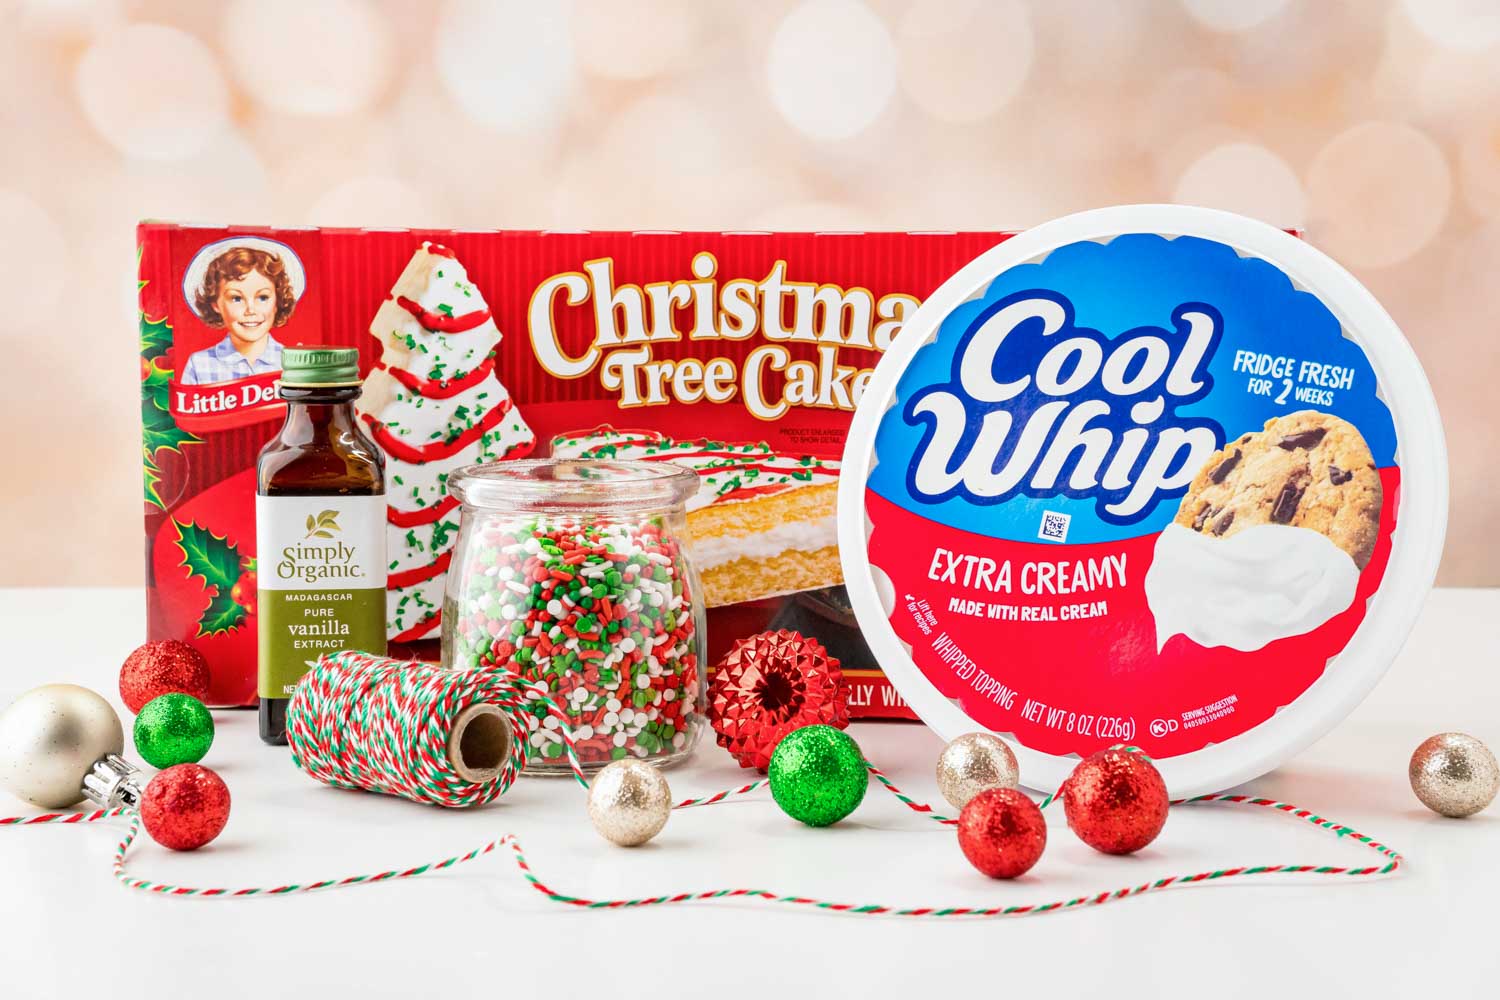 Ingredients needed to make Christmas tree cake dip including little debbie tree cakes, cool whip, vanilla, and sprinkles.